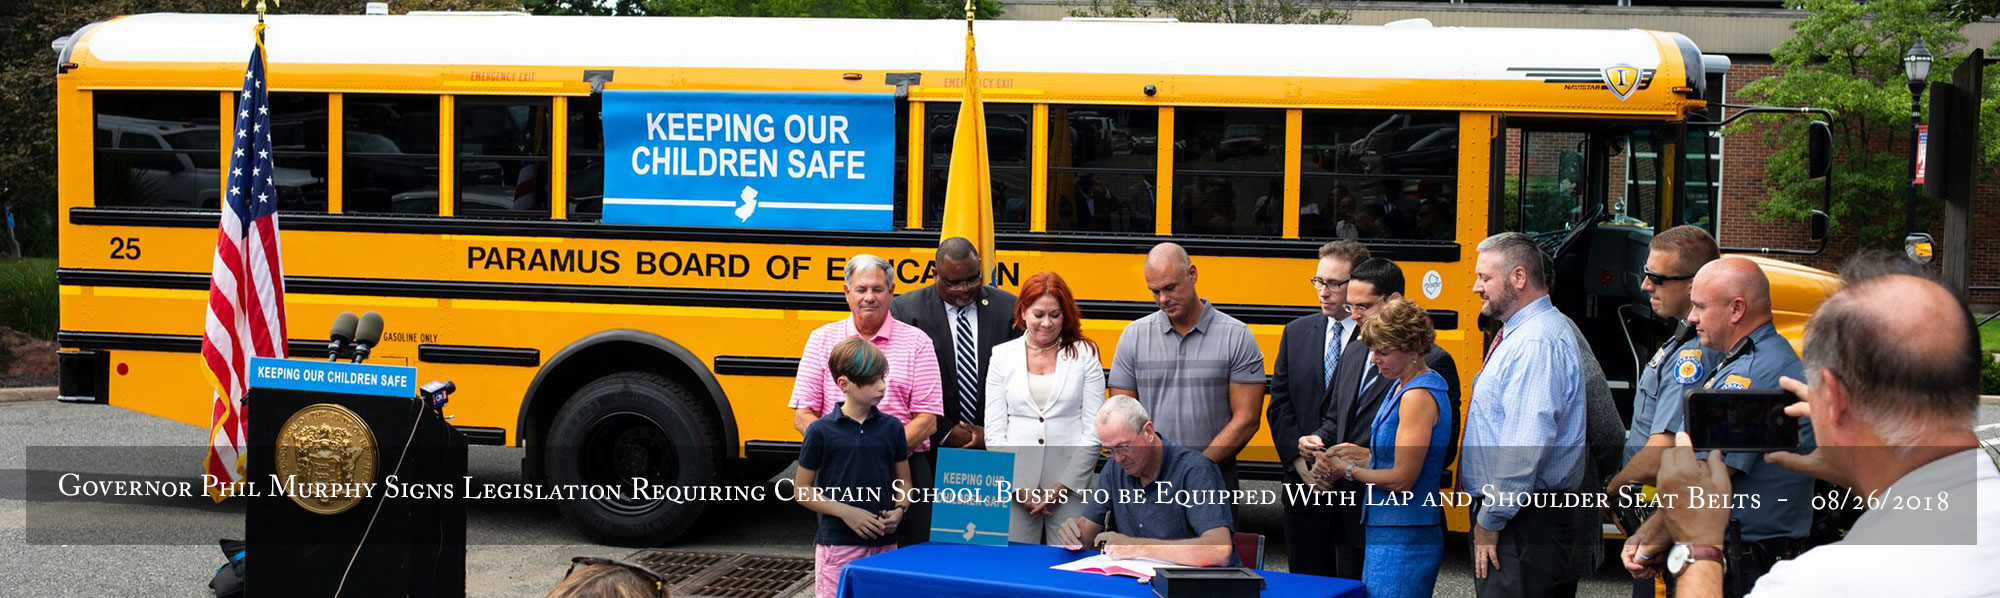 Governor Phil Murphy signs legislation requiring certain school buses to be equipped with lap and shoulder seat belts on Saturday, August 26, 2018